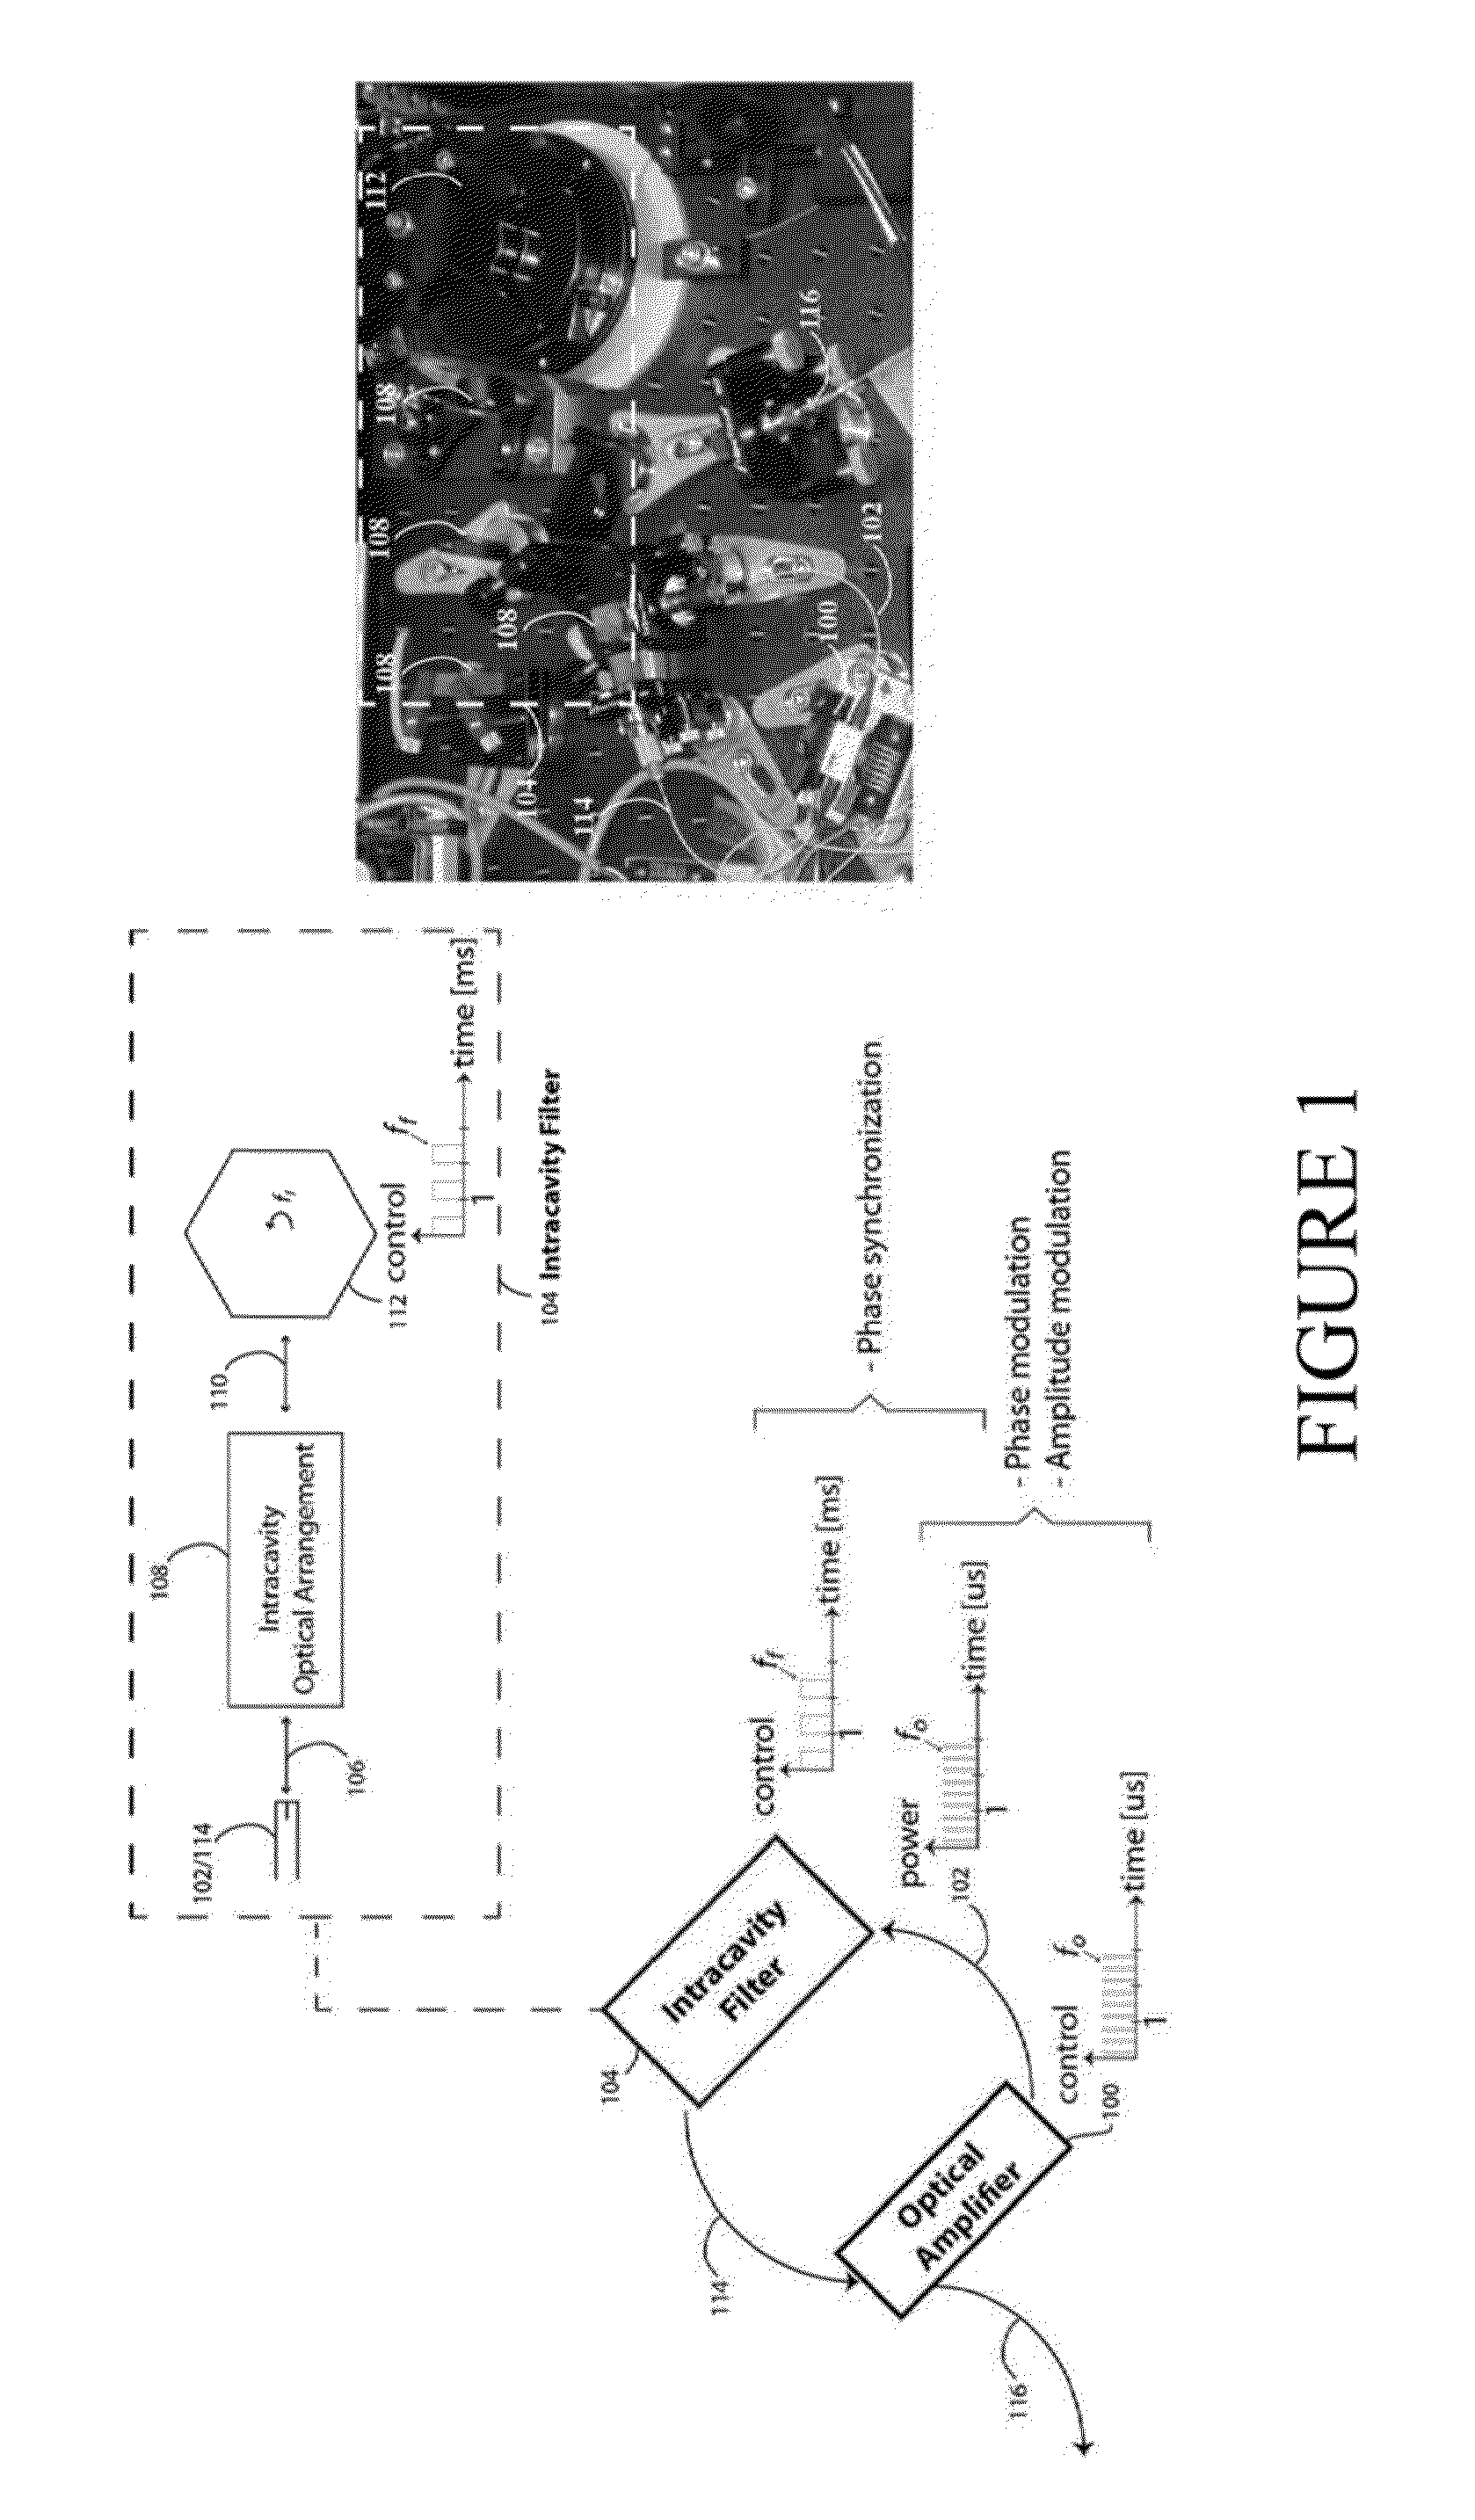 Apparatus and method which can include center-wavelength selectable, bandwidth adjustable, spectrum customizable, and/or multiplexable swept-source laser arrangement